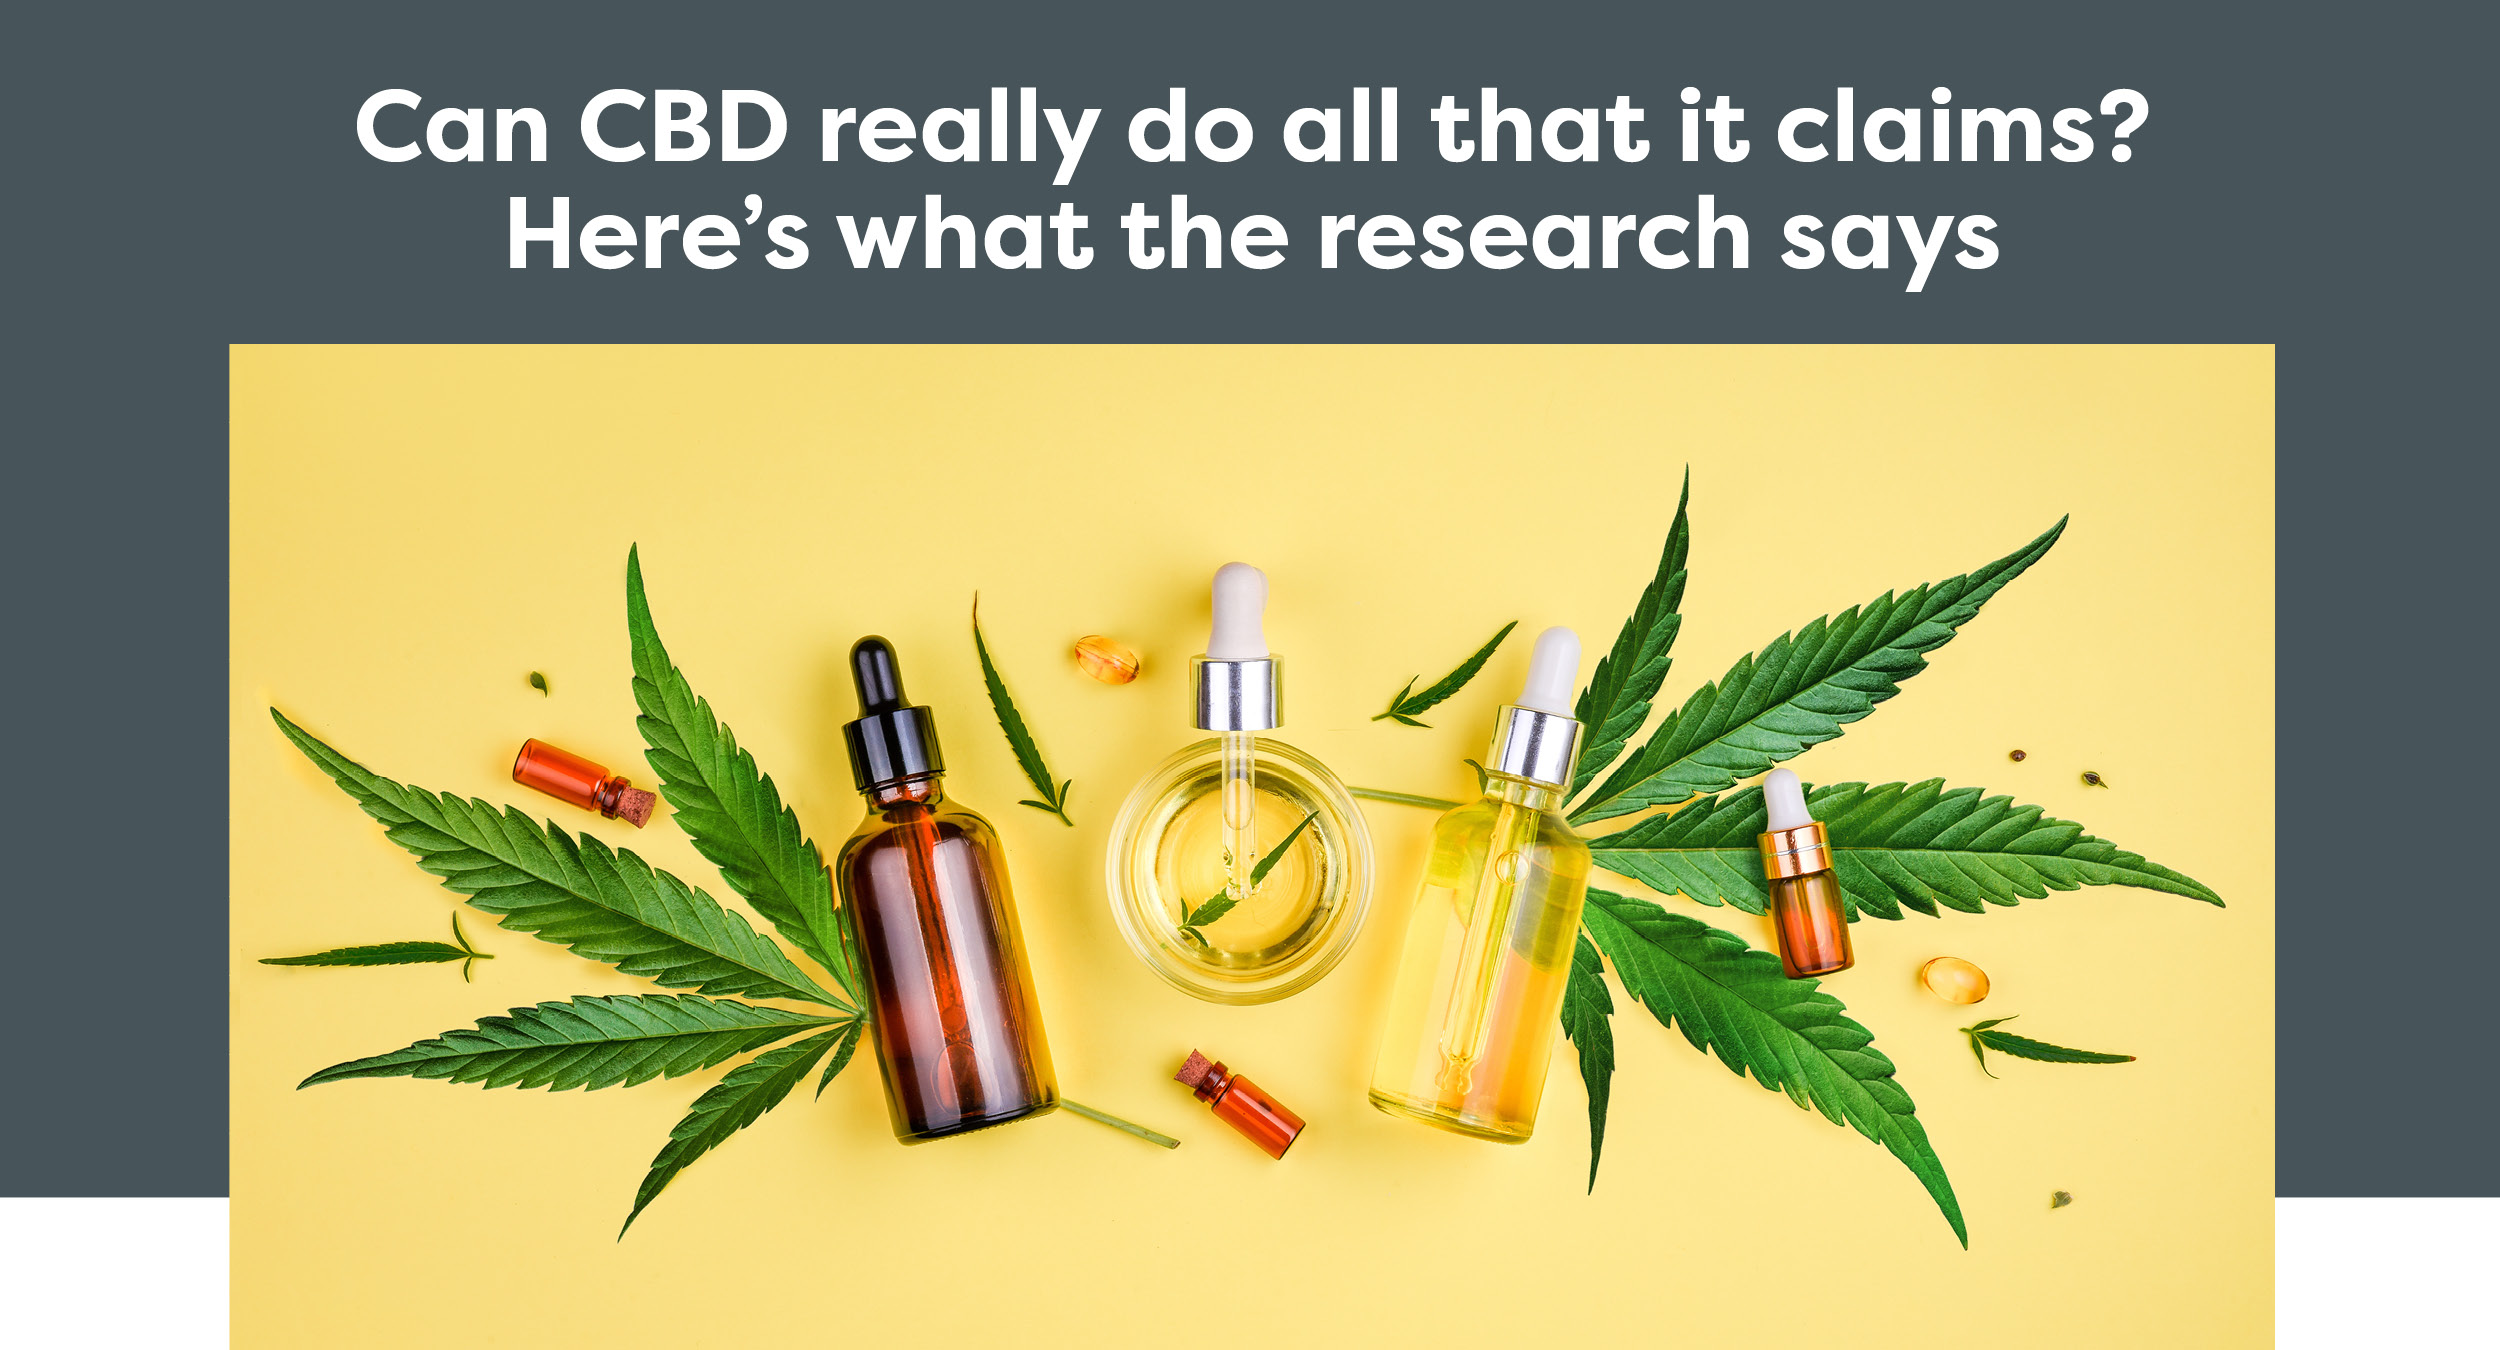 Can CBD really do all that it claims? Here’s what the research says